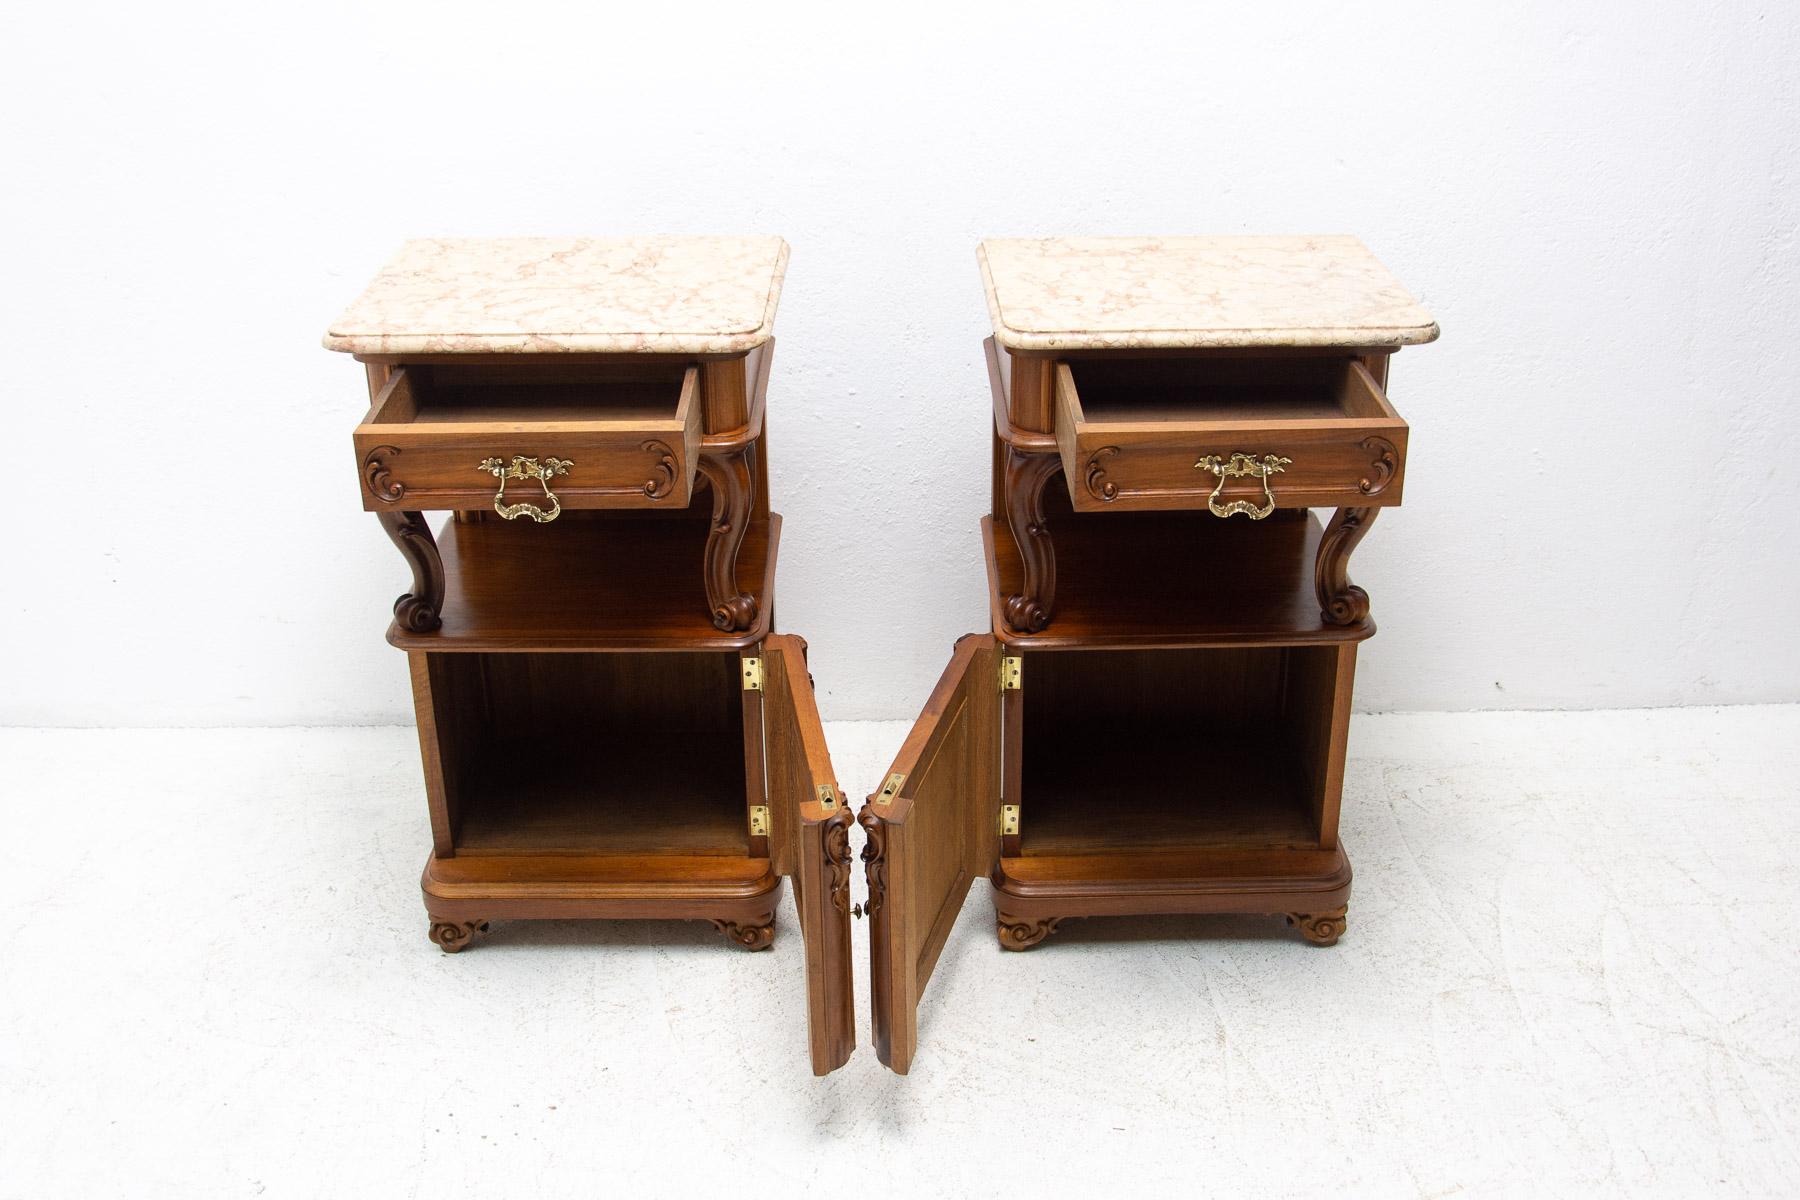 Pair of Fully Restored Historicist Bedside Tables, 1910, Austria For Sale 2